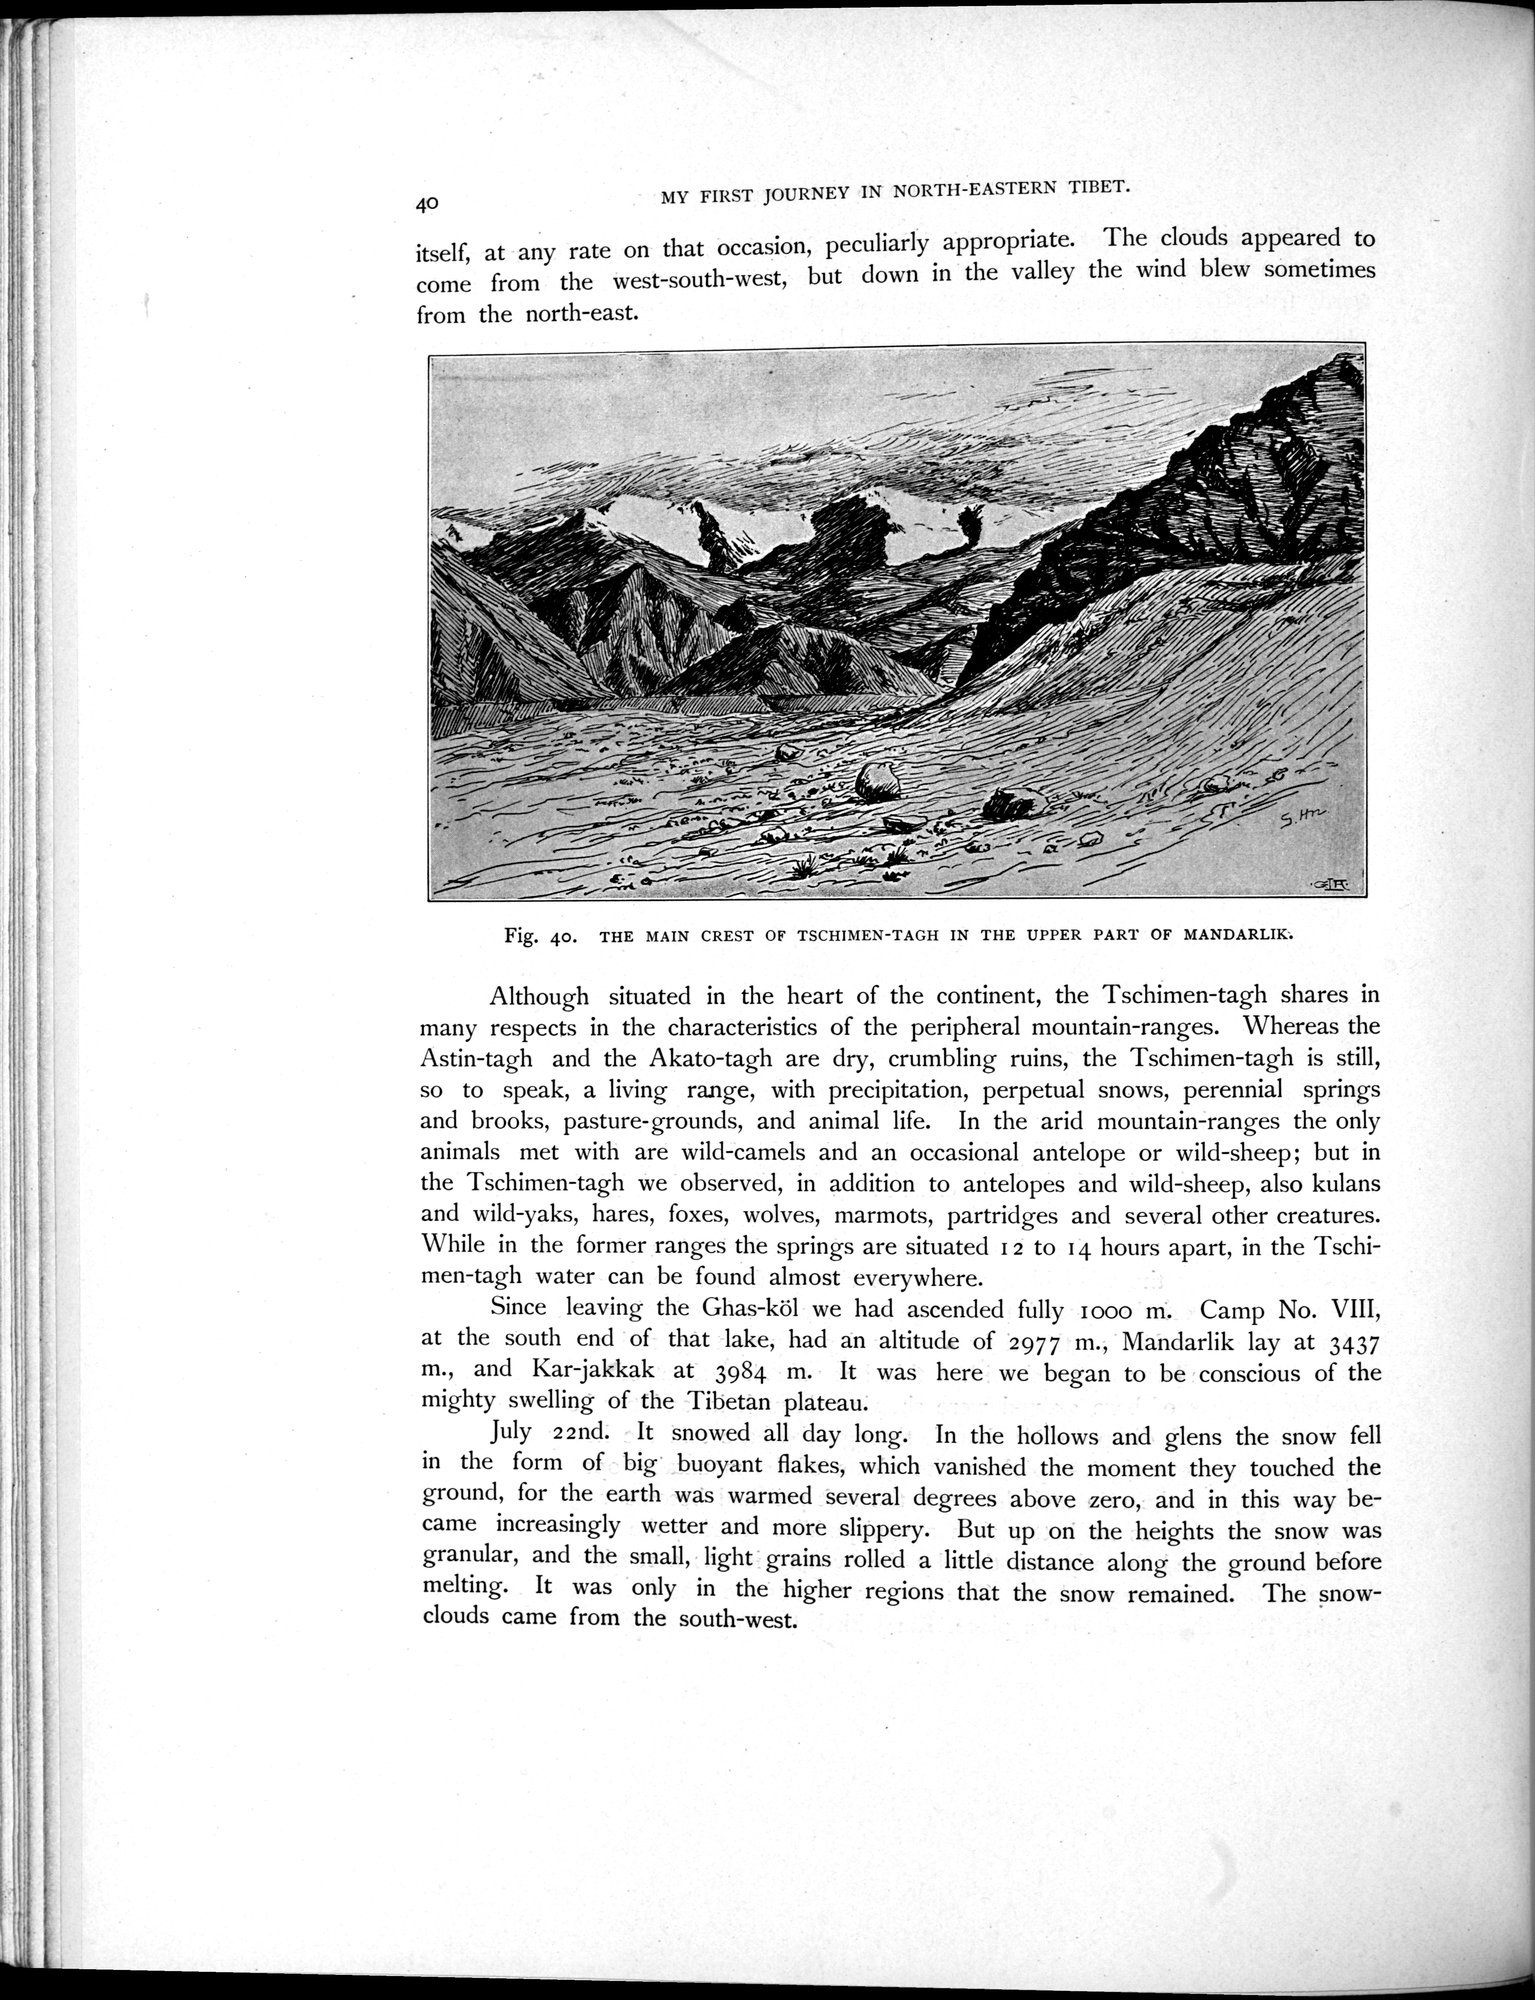 Scientific Results of a Journey in Central Asia, 1899-1902 : vol.3 / 64 ページ（白黒高解像度画像）